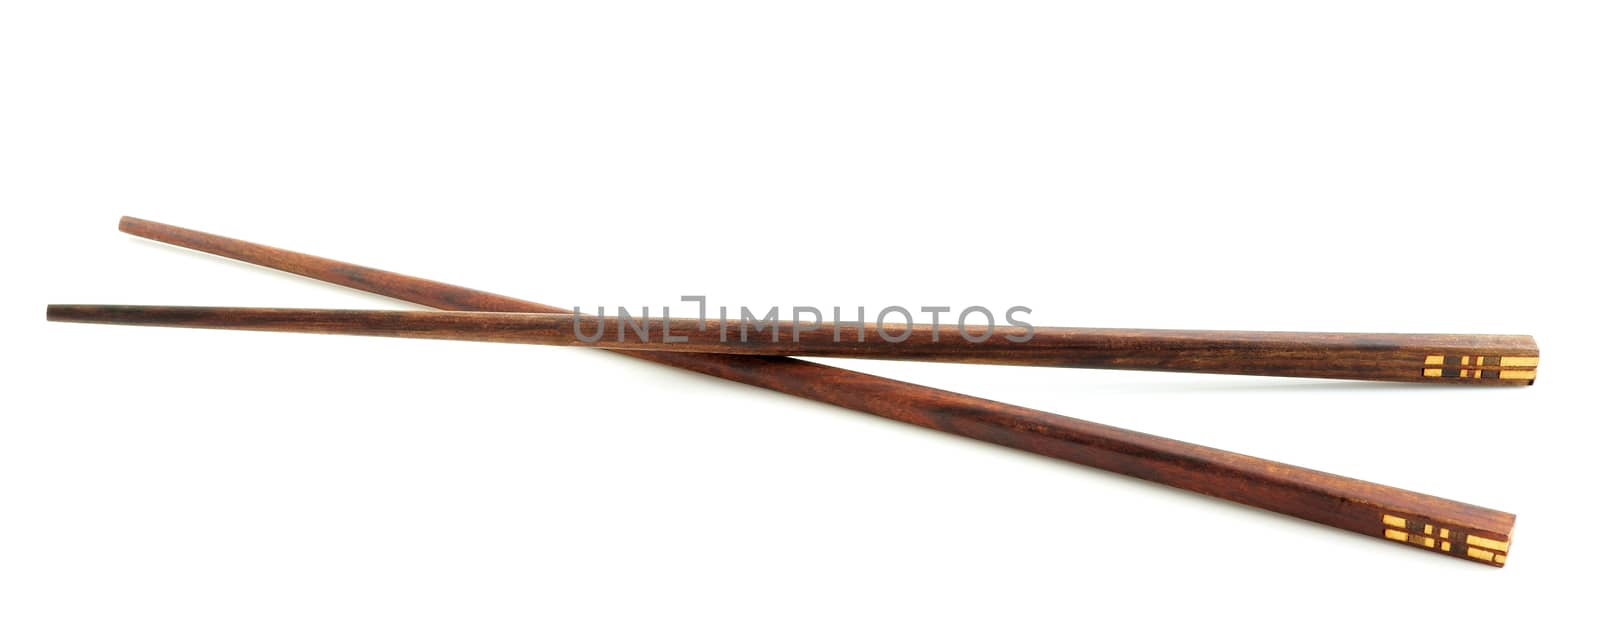 Wooden chopsticks, isolated on white background.